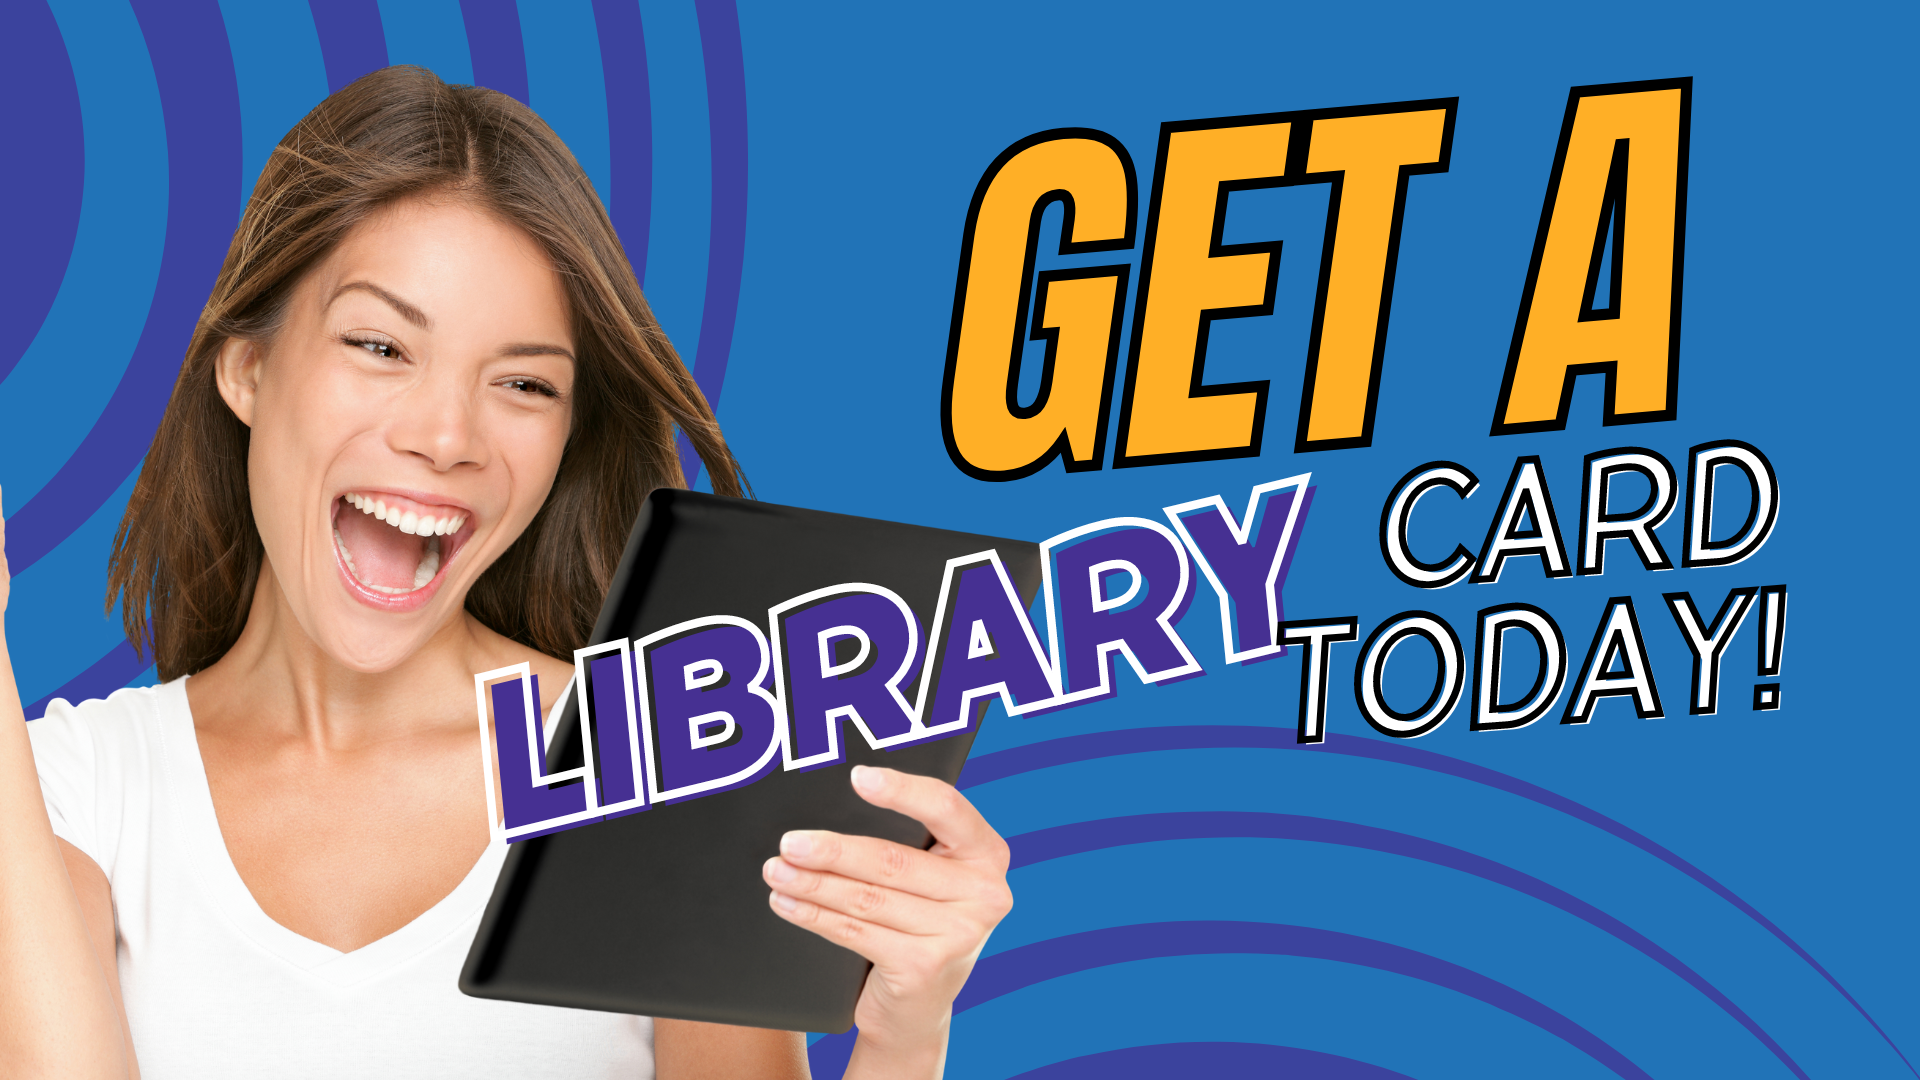 Get a library card image of excited woman